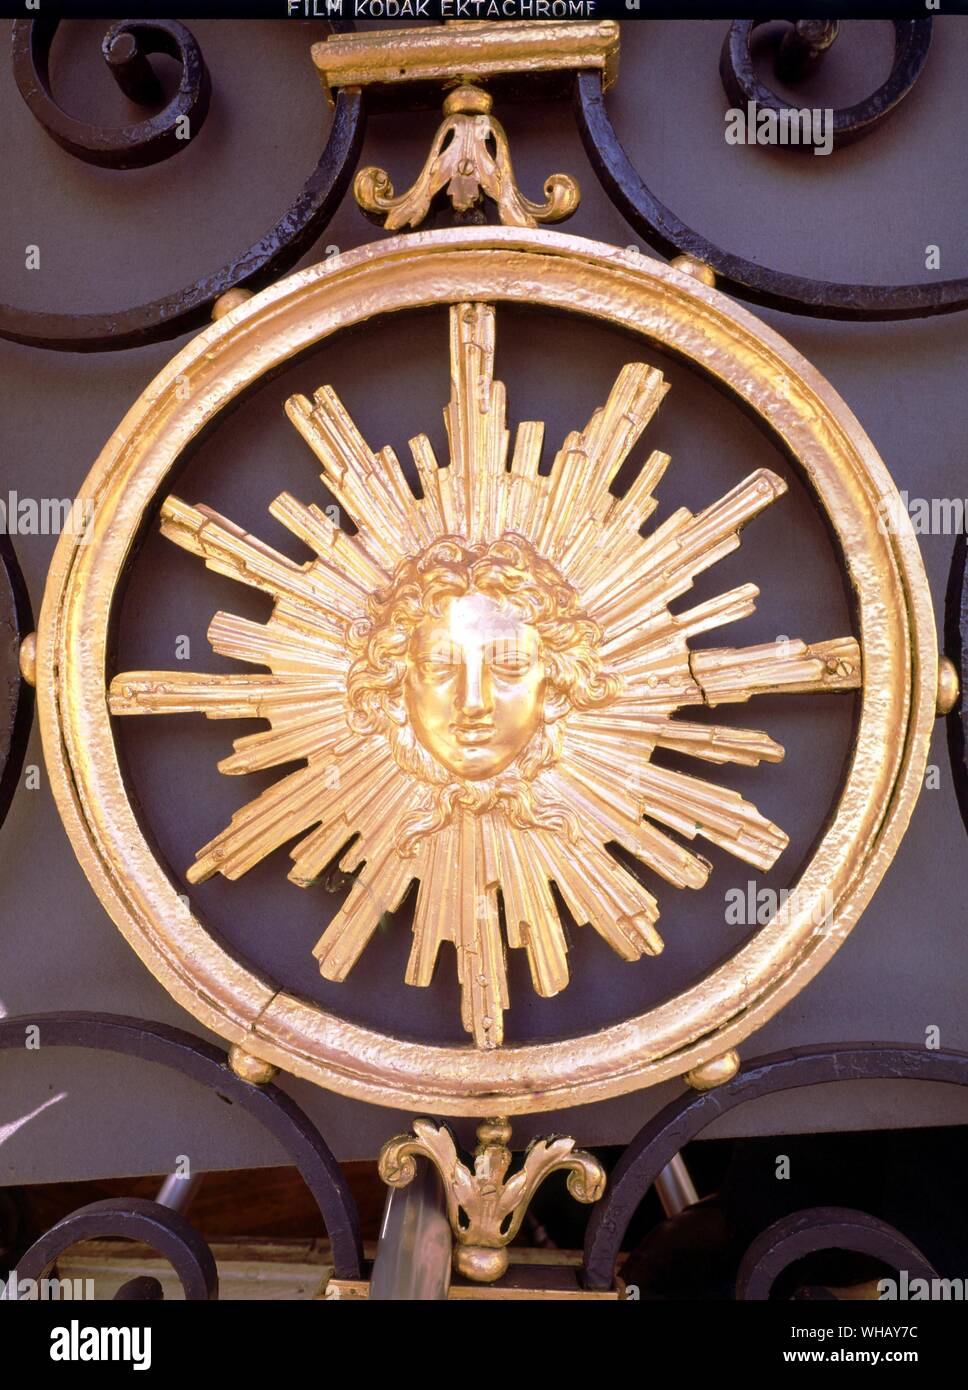 The Sun King, Coat of Arms, from a balcony in the Place Vendome, Paris. Ornately decorated with an emblem of Louis XIV. The Sun King by Nancy Mitford, back cover.. . Stock Photo